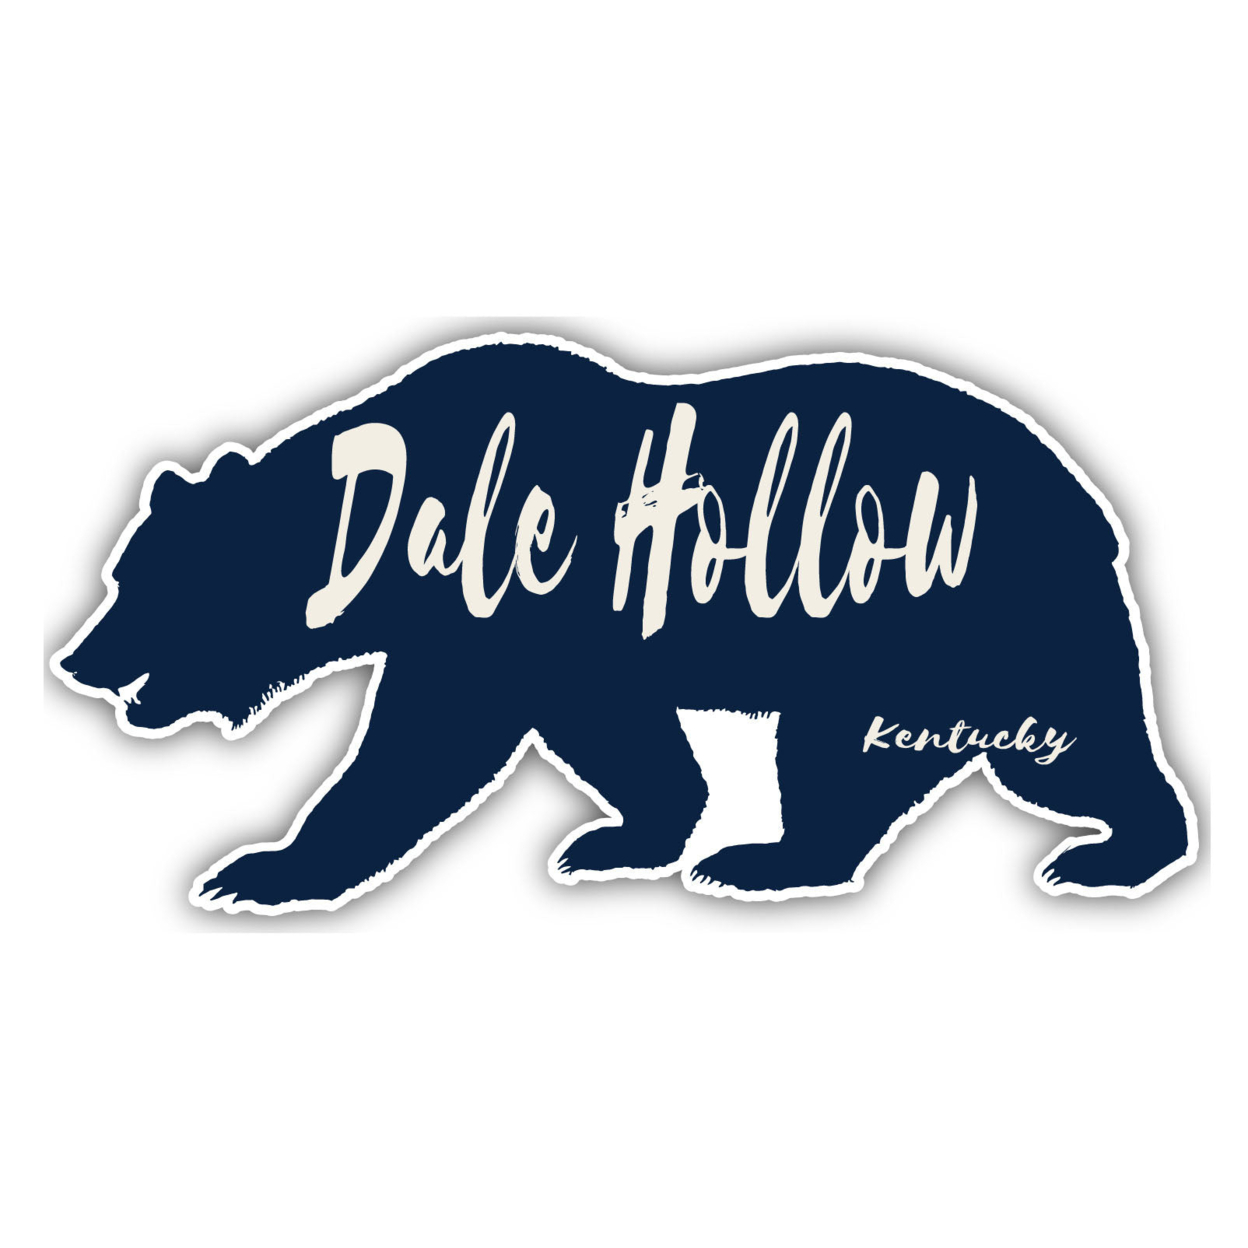 Dale Hollow Kentucky Souvenir Decorative Stickers (Choose Theme And Size) - 4-Pack, 6-Inch, Bear